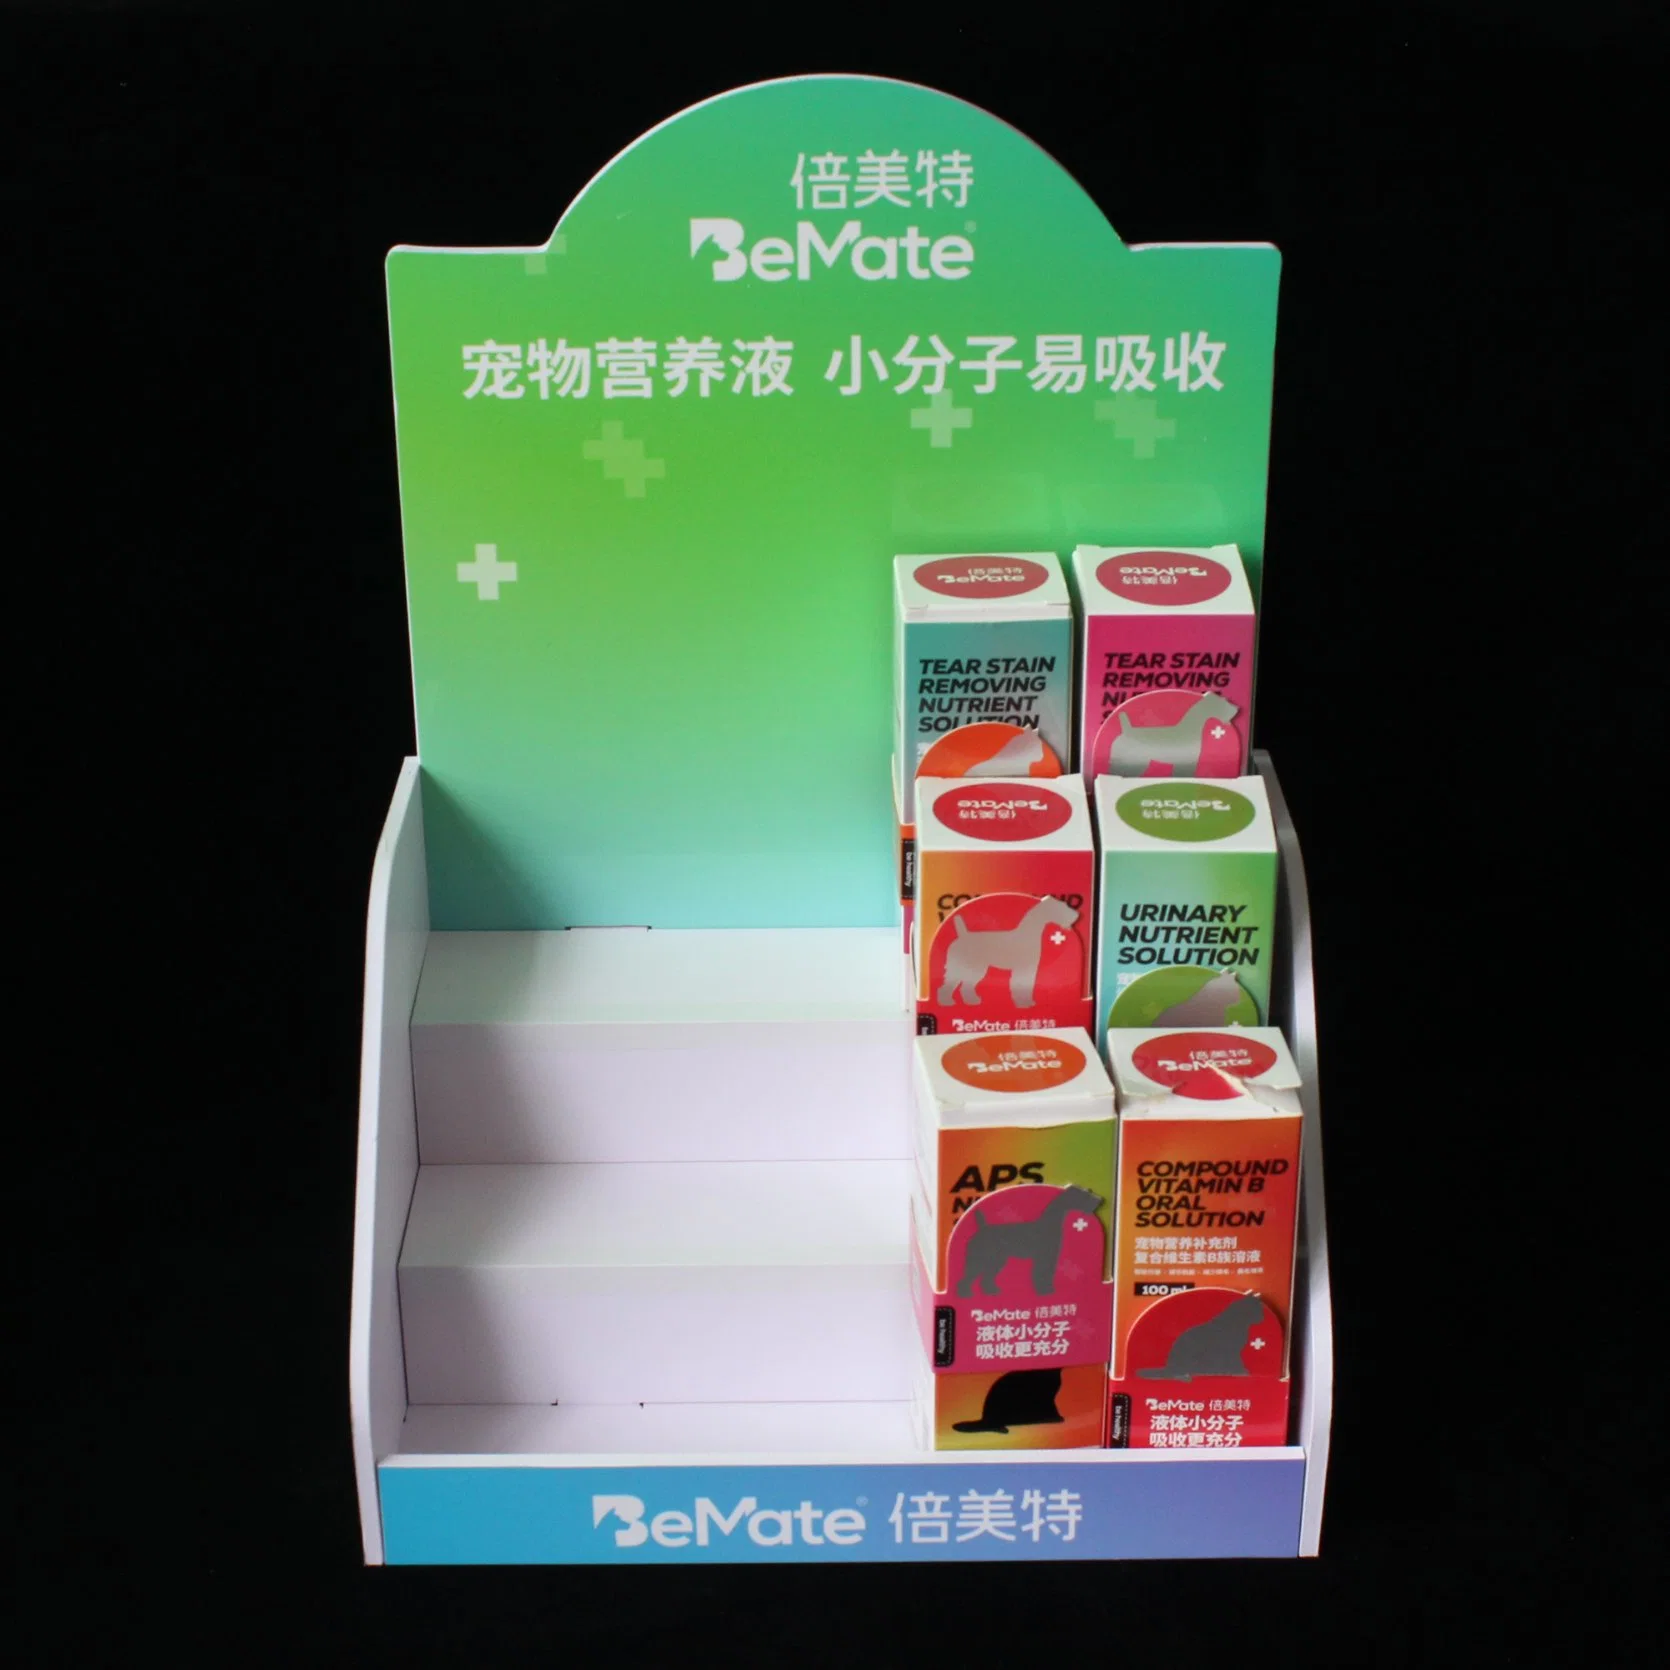 Professional Customized Three Layer Acrylic Pet Nutrient Solution Display Shelves